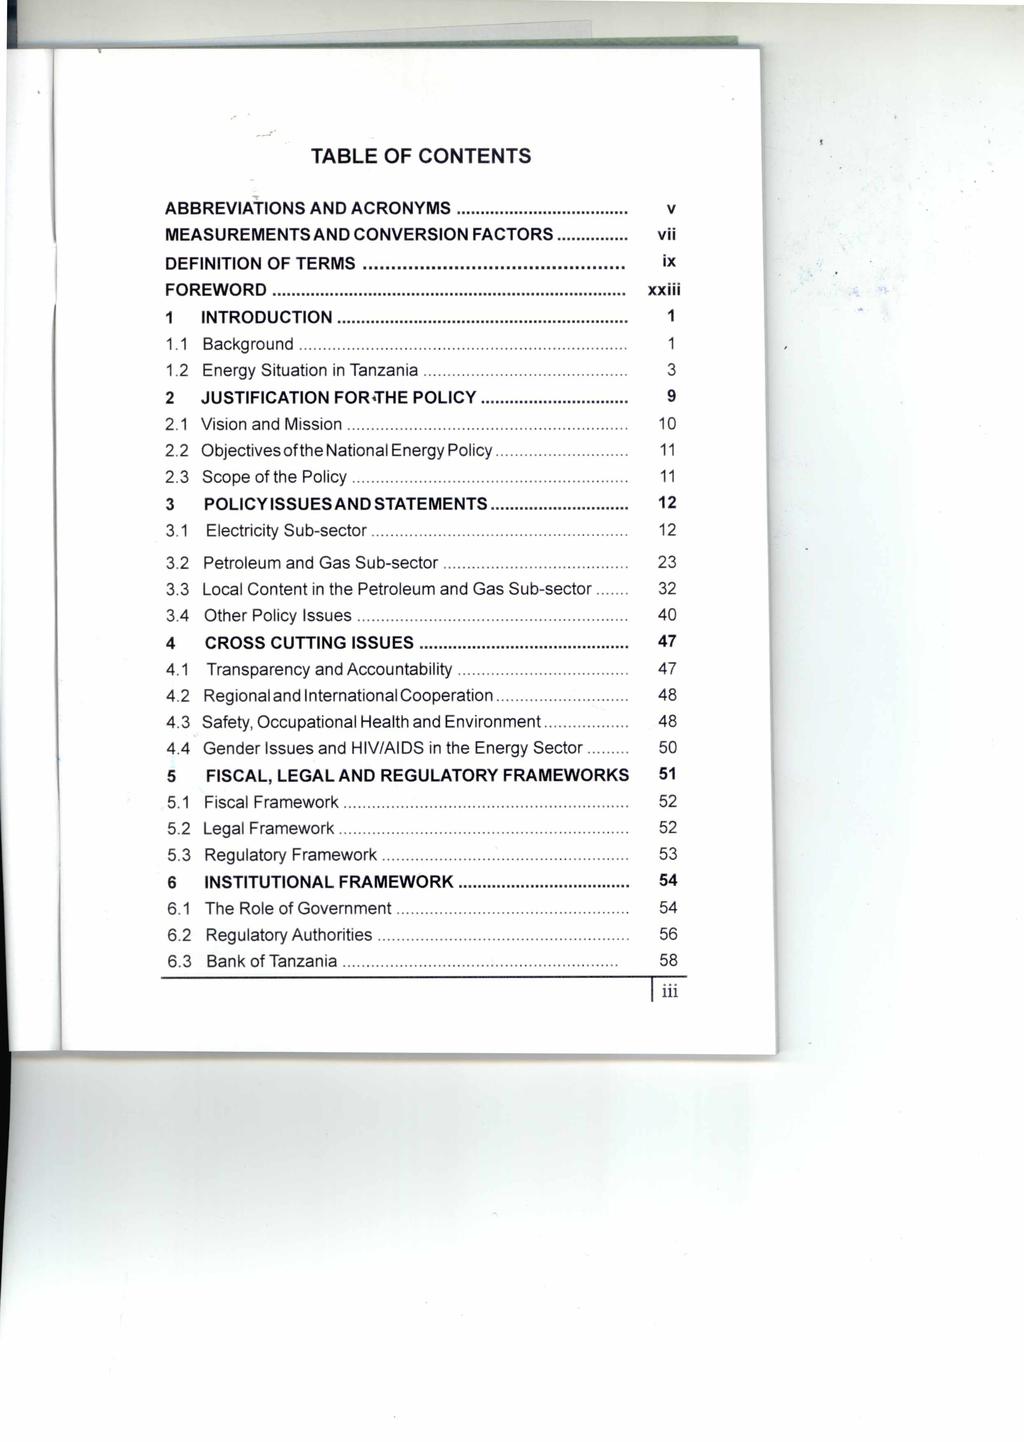 TABLE OF CONTENTS ABBREVIATIONS AND ACRONYMS MEASUREMENTS AND CONVERSION FACTORS vii DEFINITION OF TERMS ix FOREWORD xxiii 1 INTRODUCTION 1 1.1 Background 1 1.